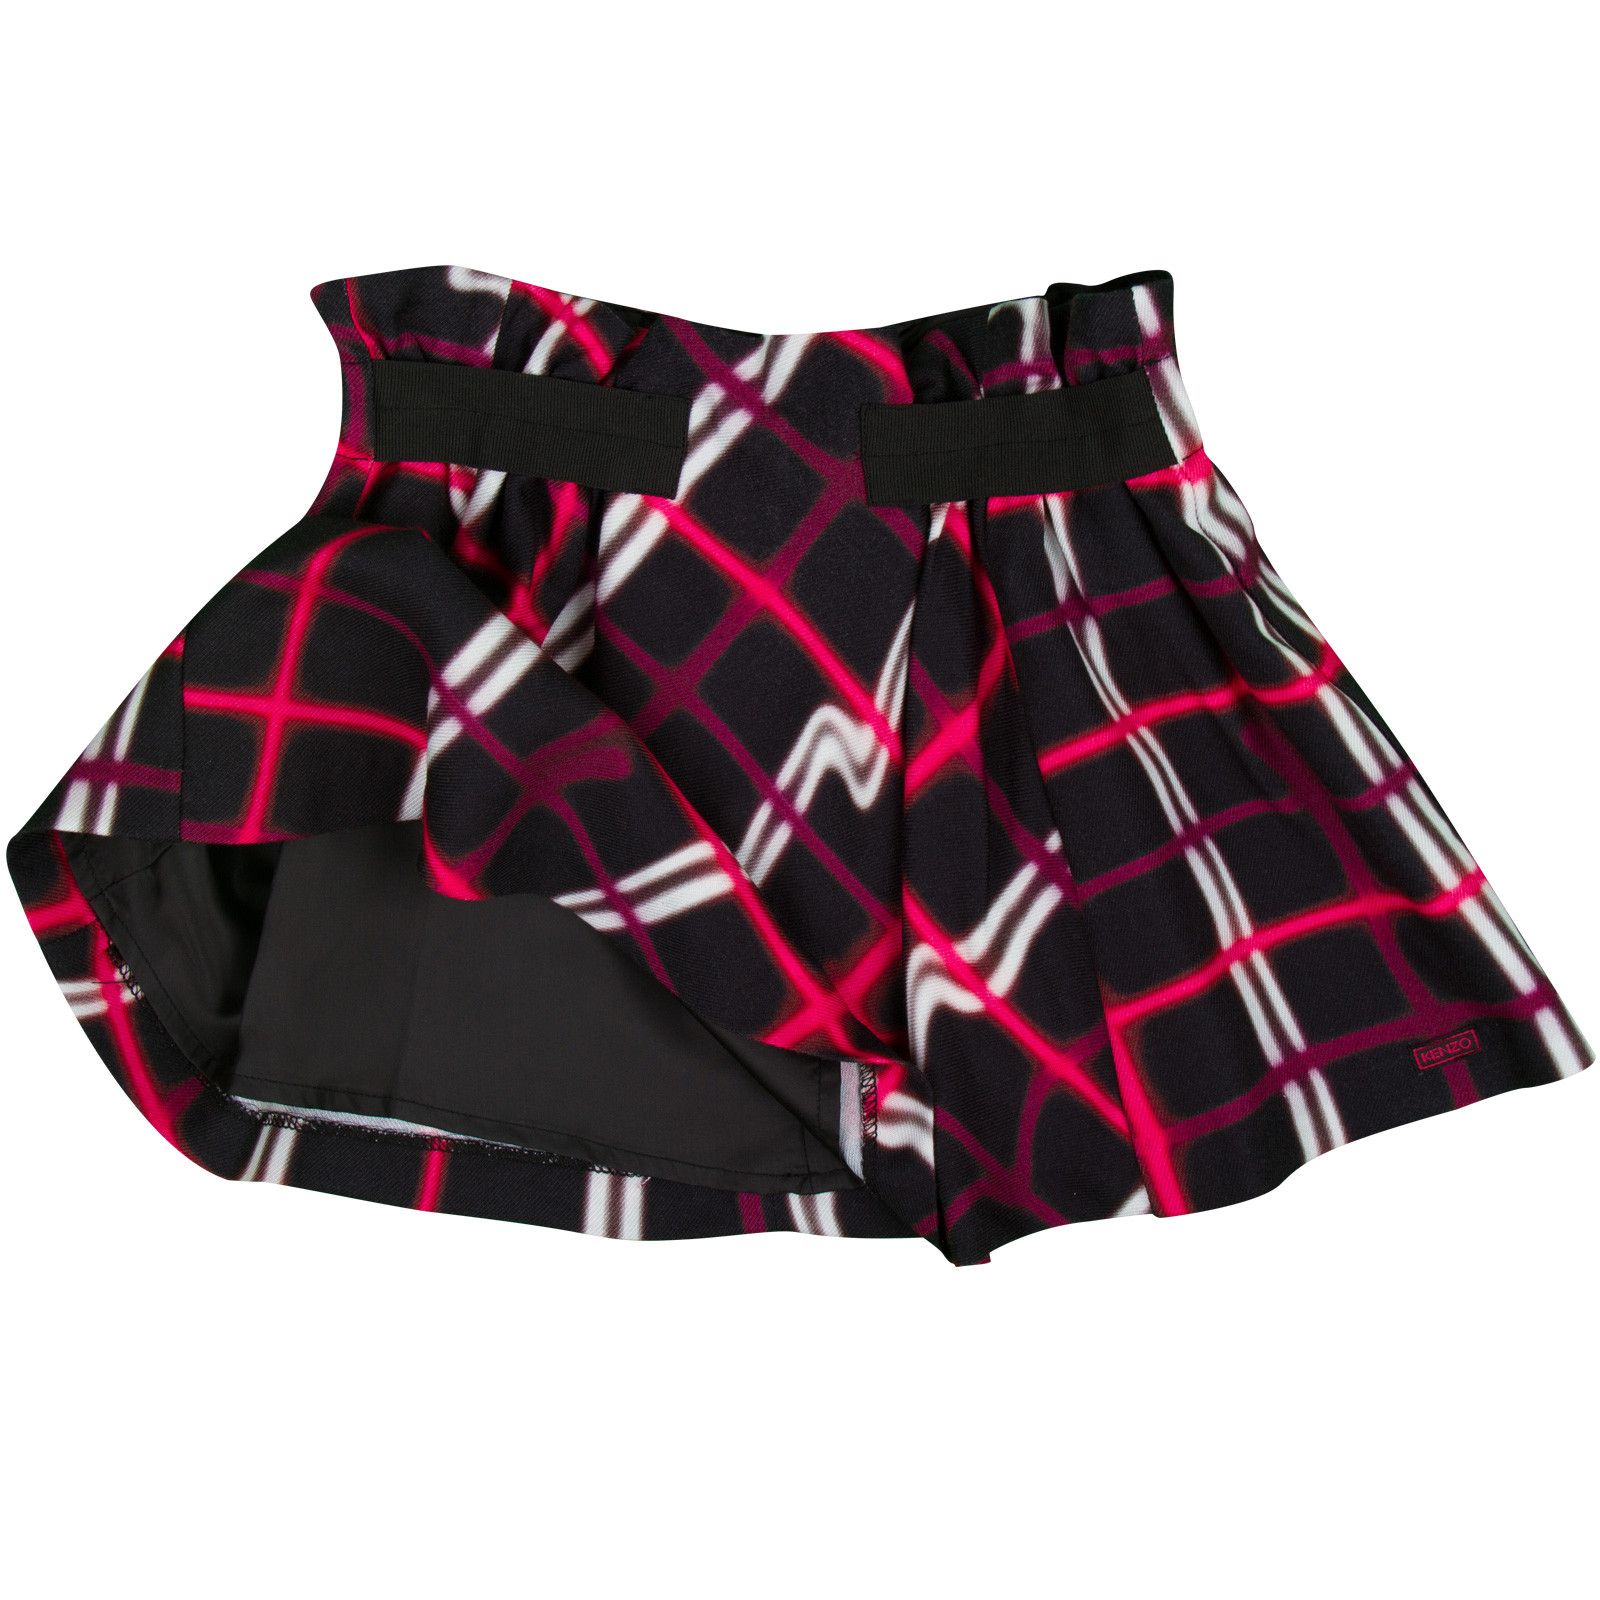 Girls Black Skirt With Red&White Check Printed - CÉMAROSE | Children's Fashion Store - 3